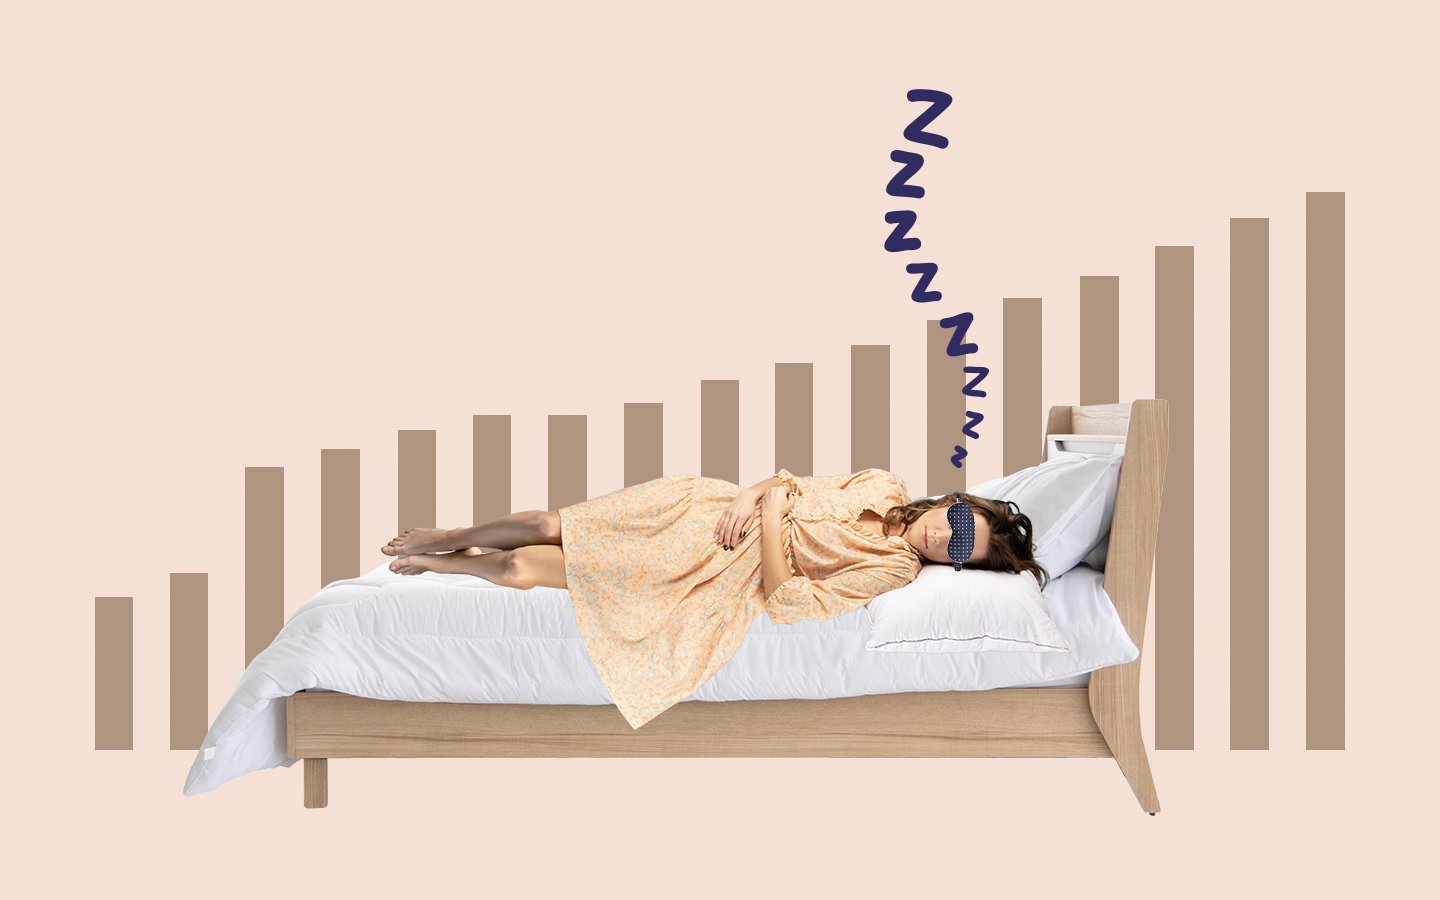 Snooze News: Nearly 1 in 5 women take 90 minutes to fall asleep, double the number of men